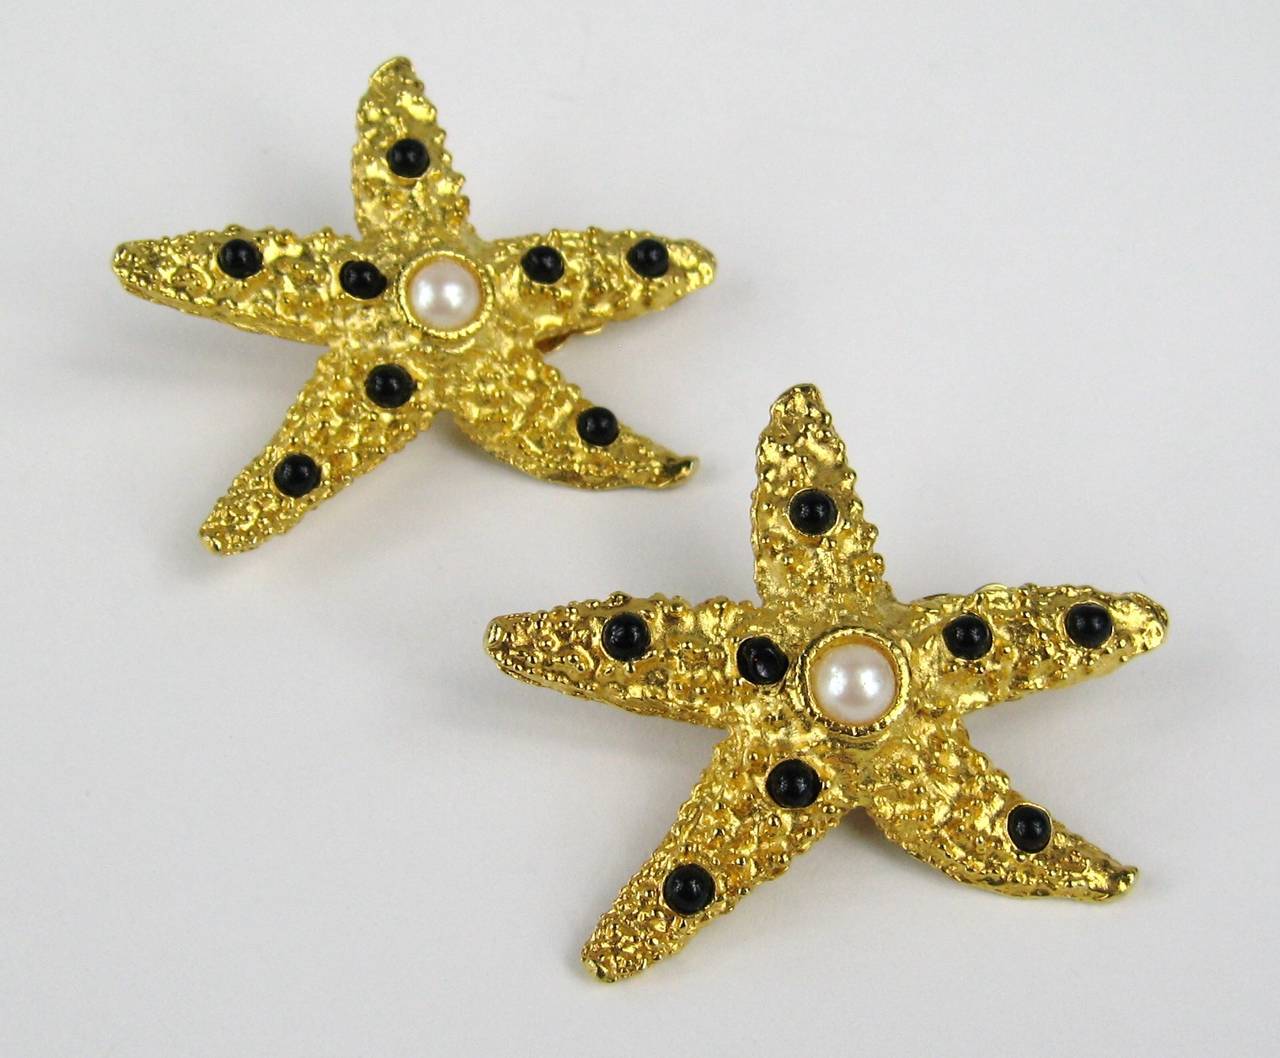 Yosca Star Fish Earrings, Clip on's. 
Poured Glass with Pearl Center. Hallmarked
2